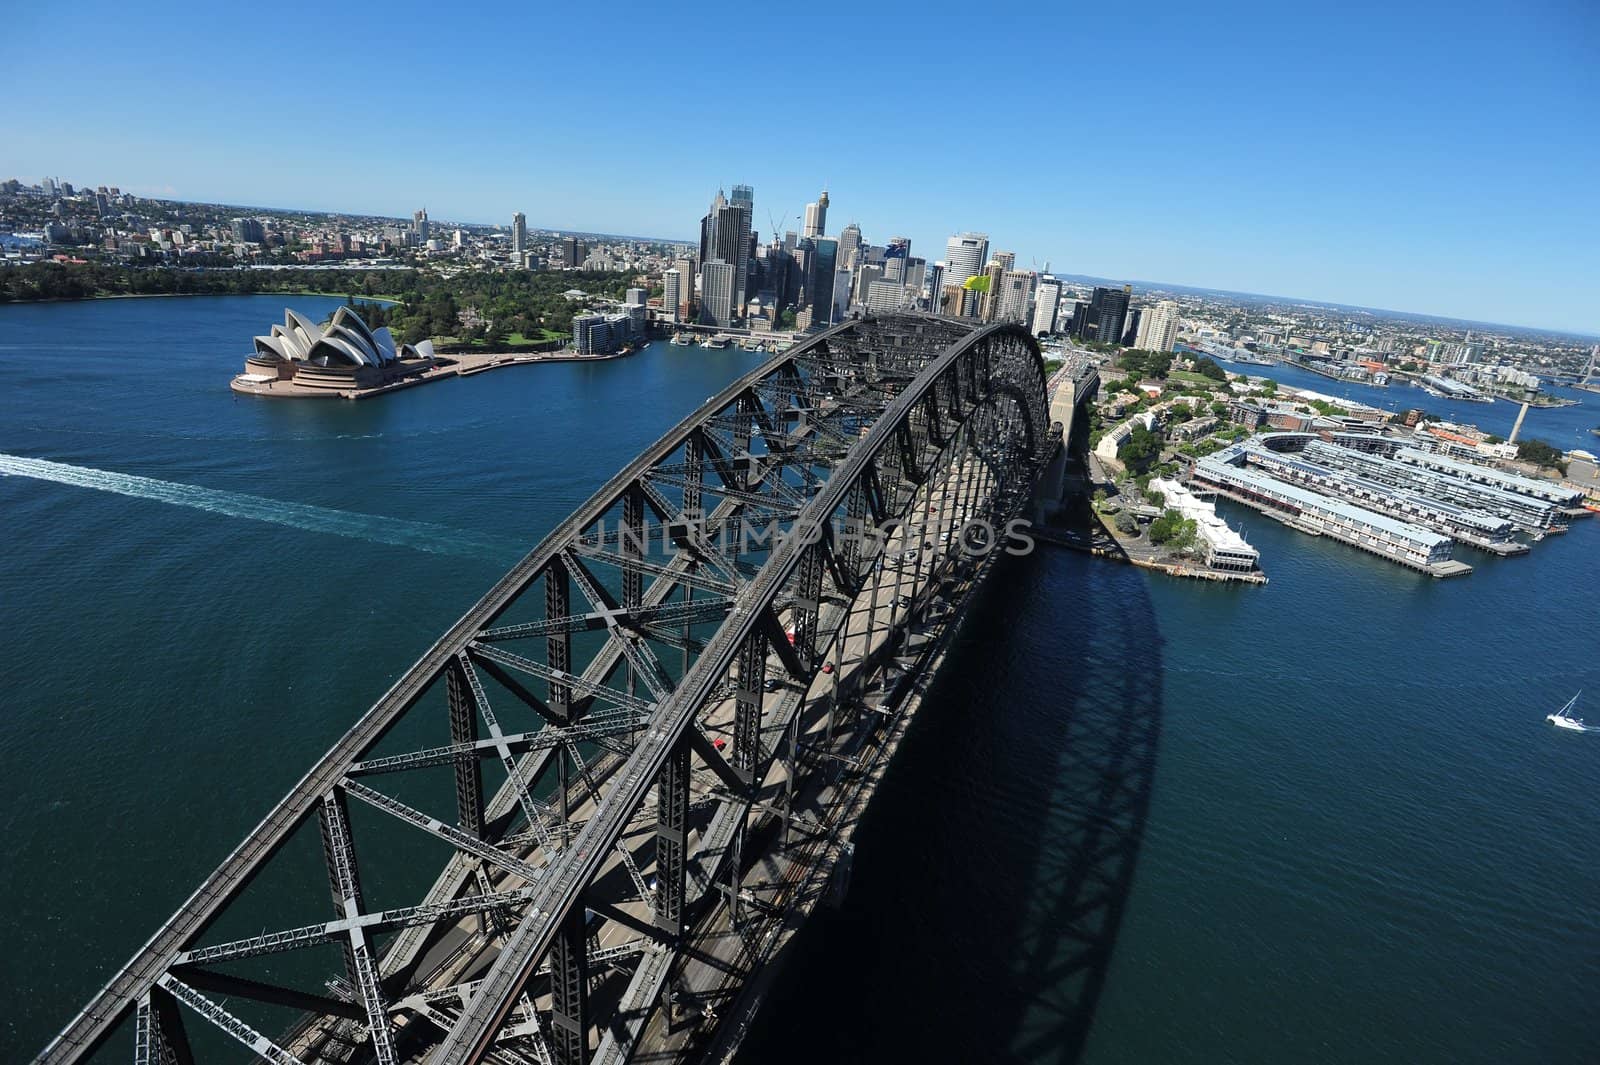 An aerial view of the Sydney Harbour Bridge as the sunlight shimmers on the water below.